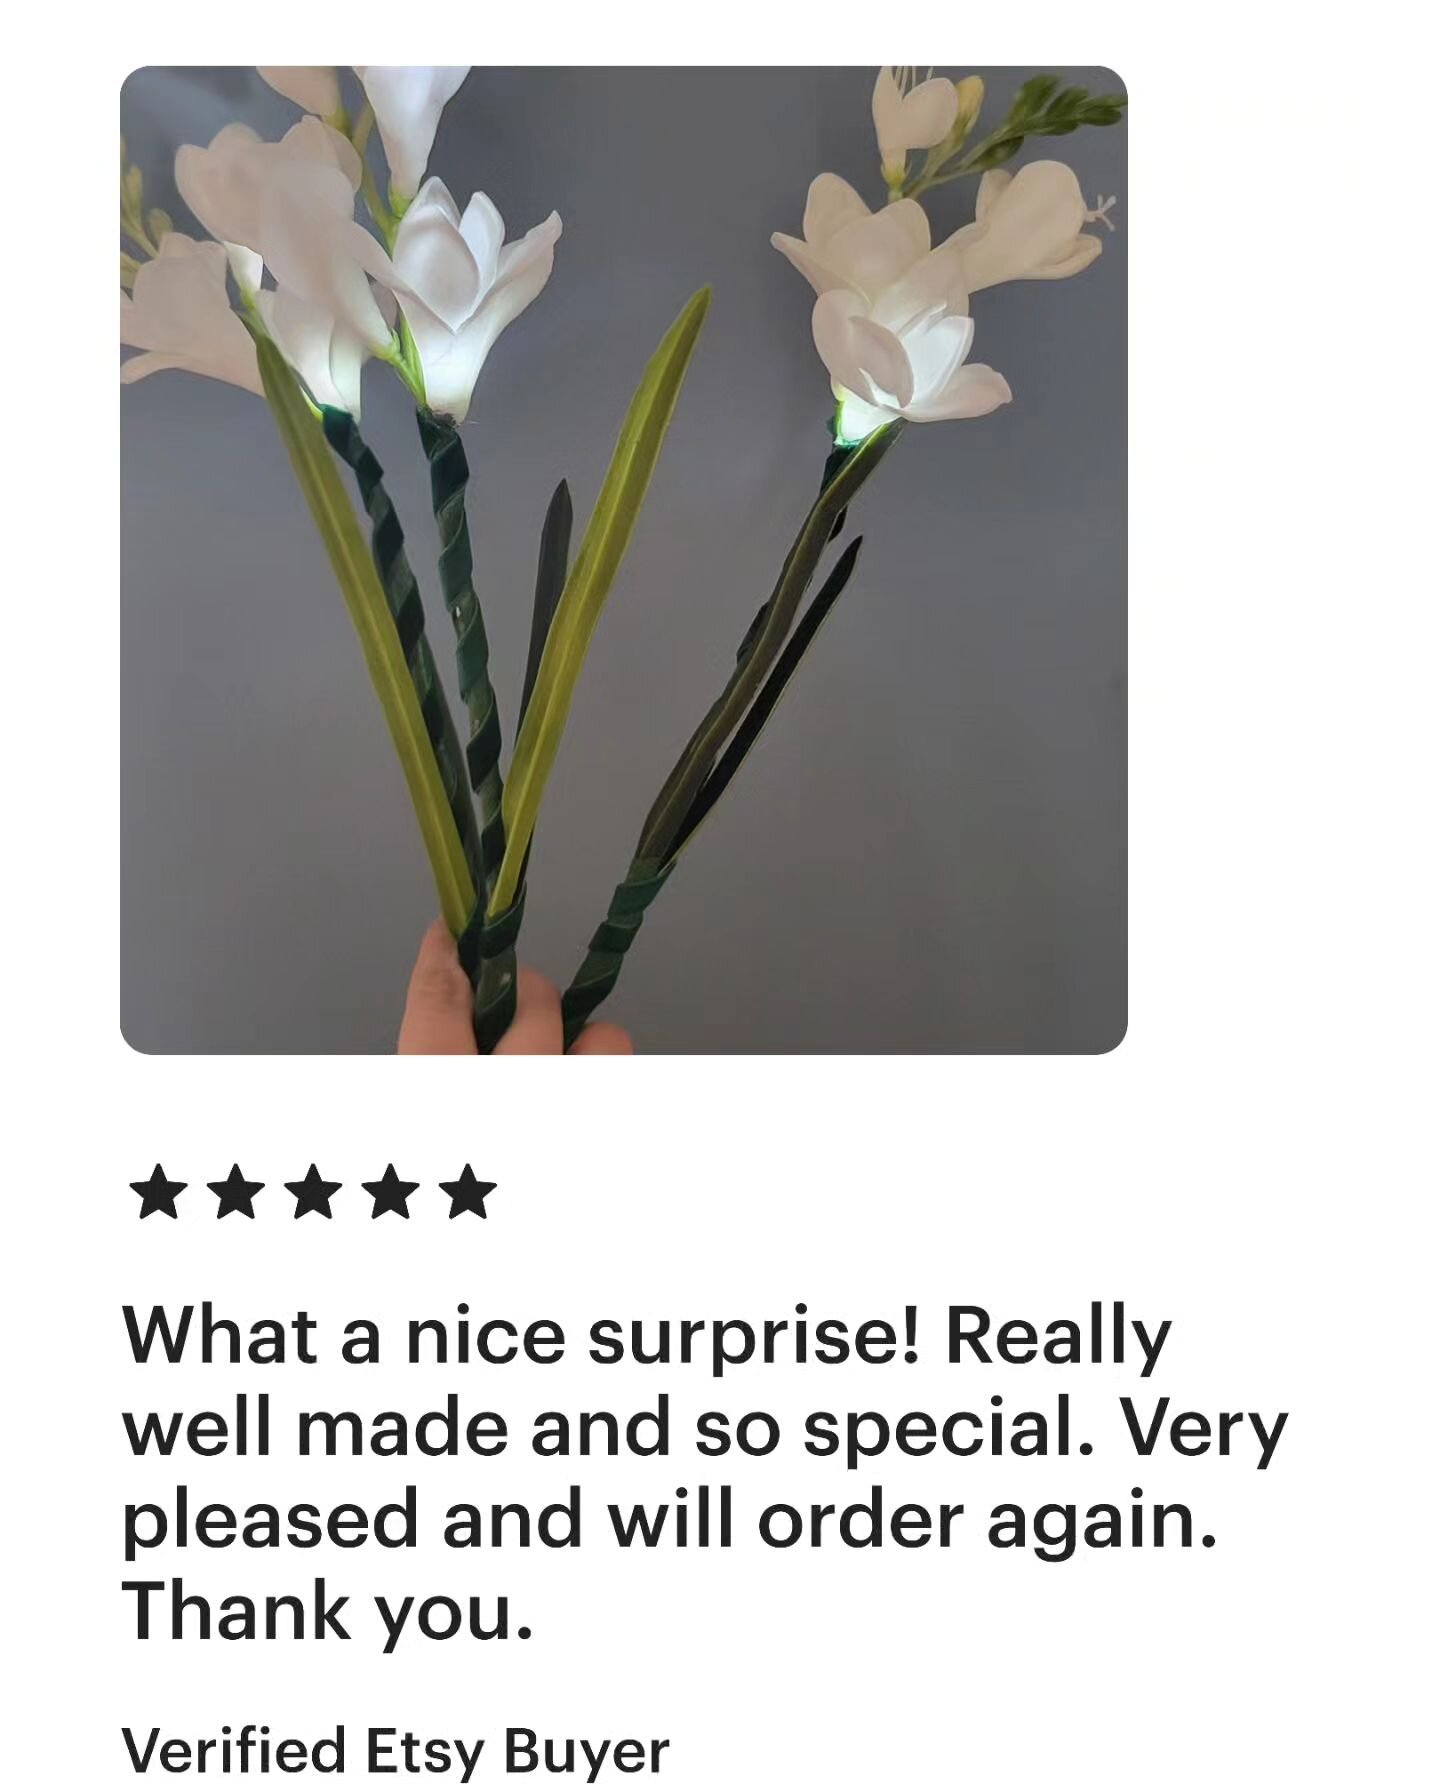 We appreciate the kind and homest review! If you have a wedding coming up and want it to be like the #crazyrichasianswedding scene or you can't use fireworks,  get our custom-made #weddingwands at
https://ledlutions.etsy.com

#weddingsendoff #lightup